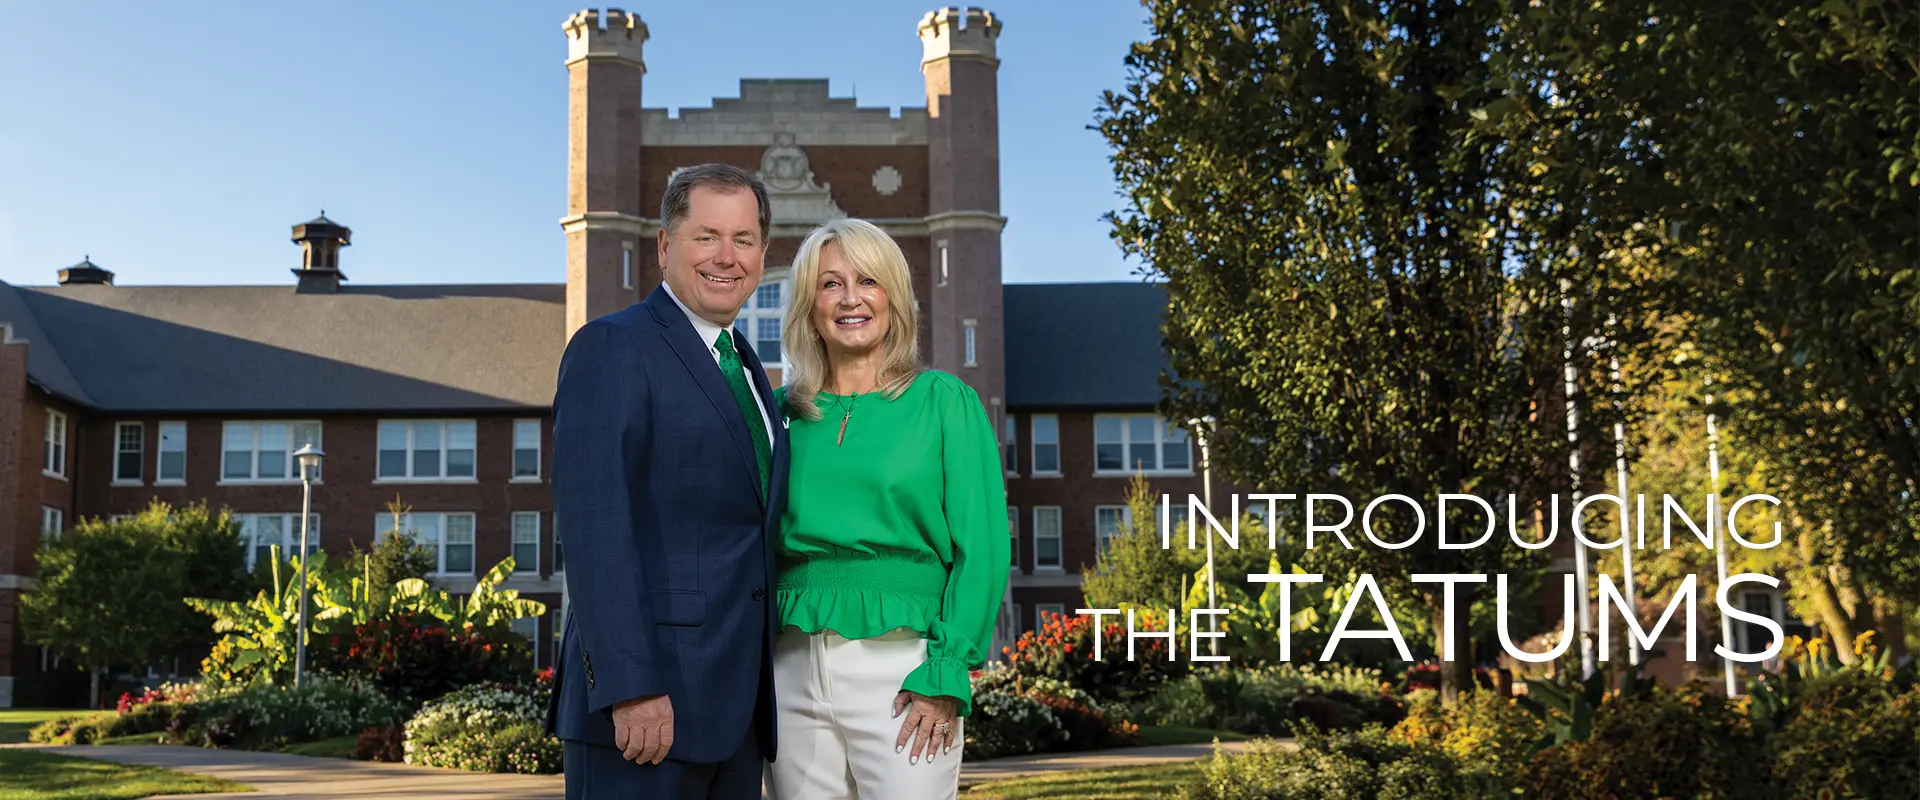 Introducing the Tatums – Northwest’s new president and first lady are focused on investing in the future of the University